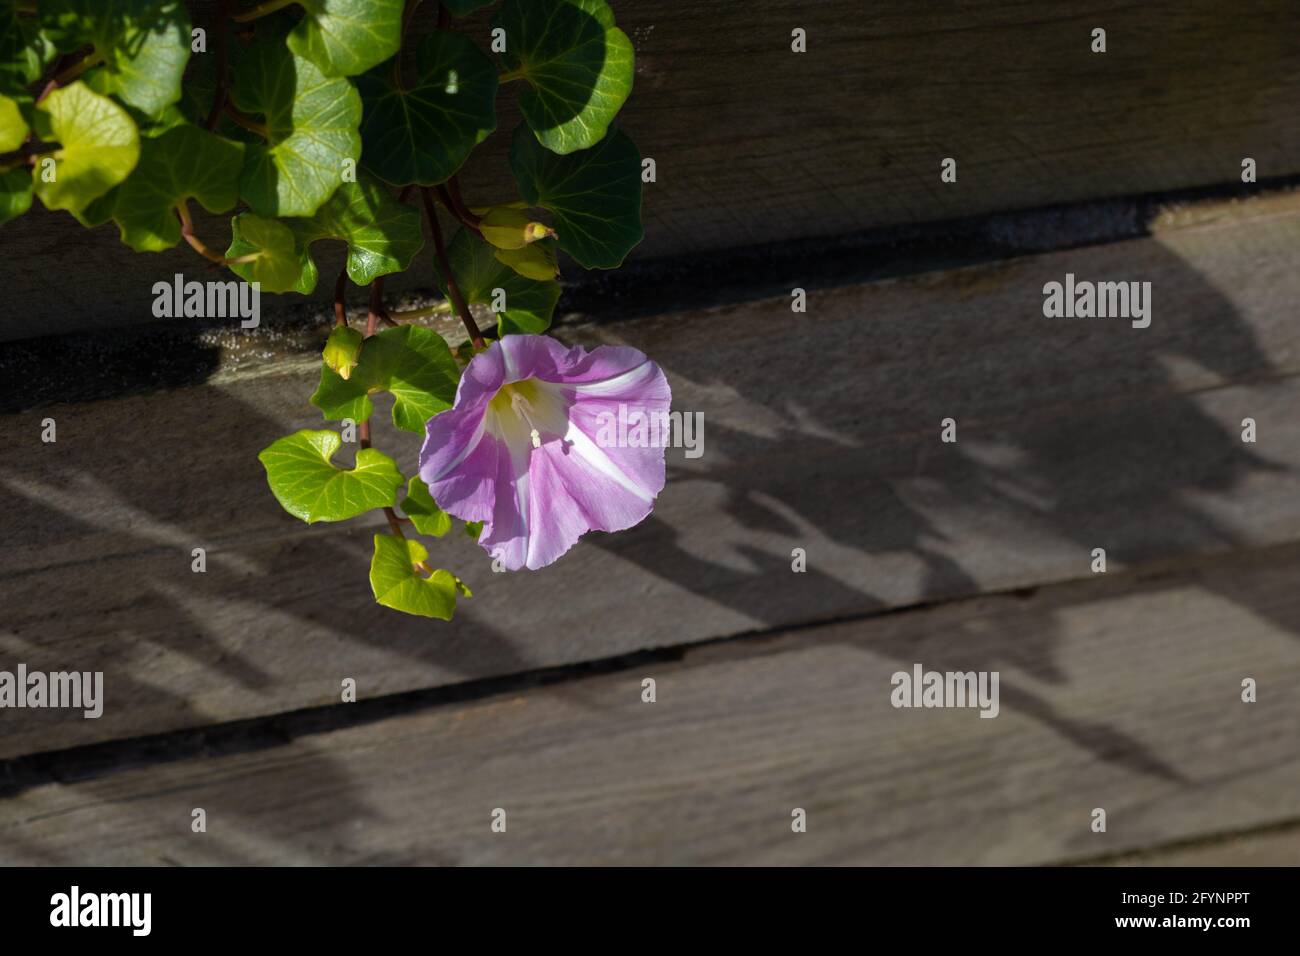 Close-up of pink seashore false bindweed flower and leaves hanging on boardwalk, illuminated with natural sunlight, casting shadows on wooden boards Stock Photo